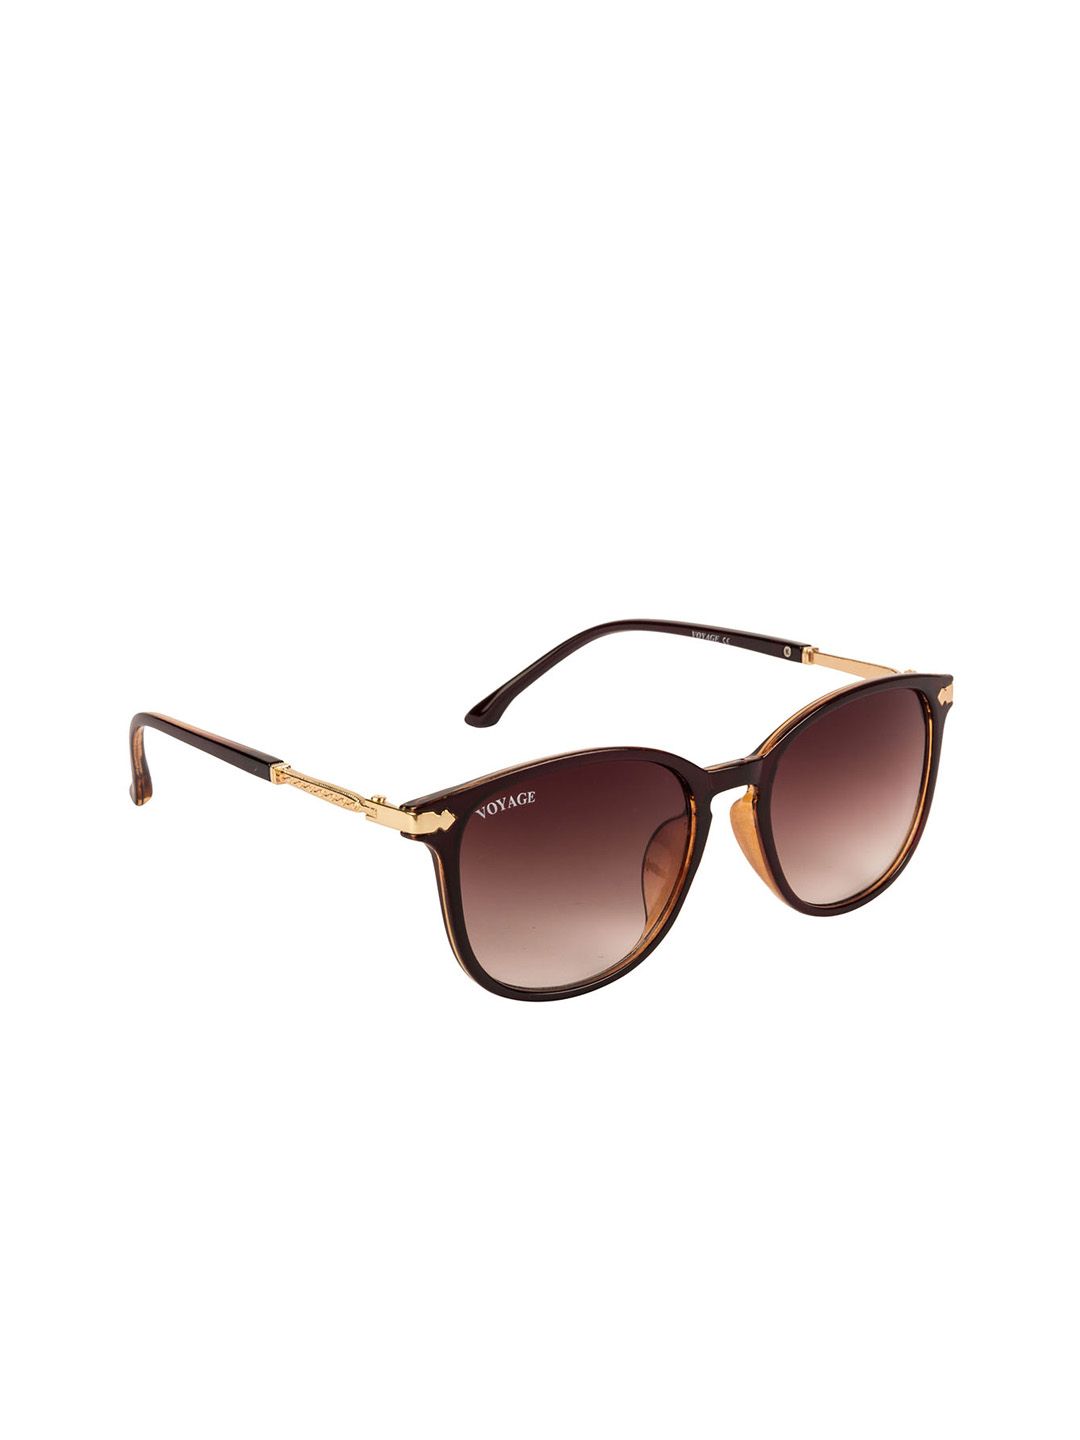 Voyage Women Oval Sunglasses A3046MG3183 Price in India